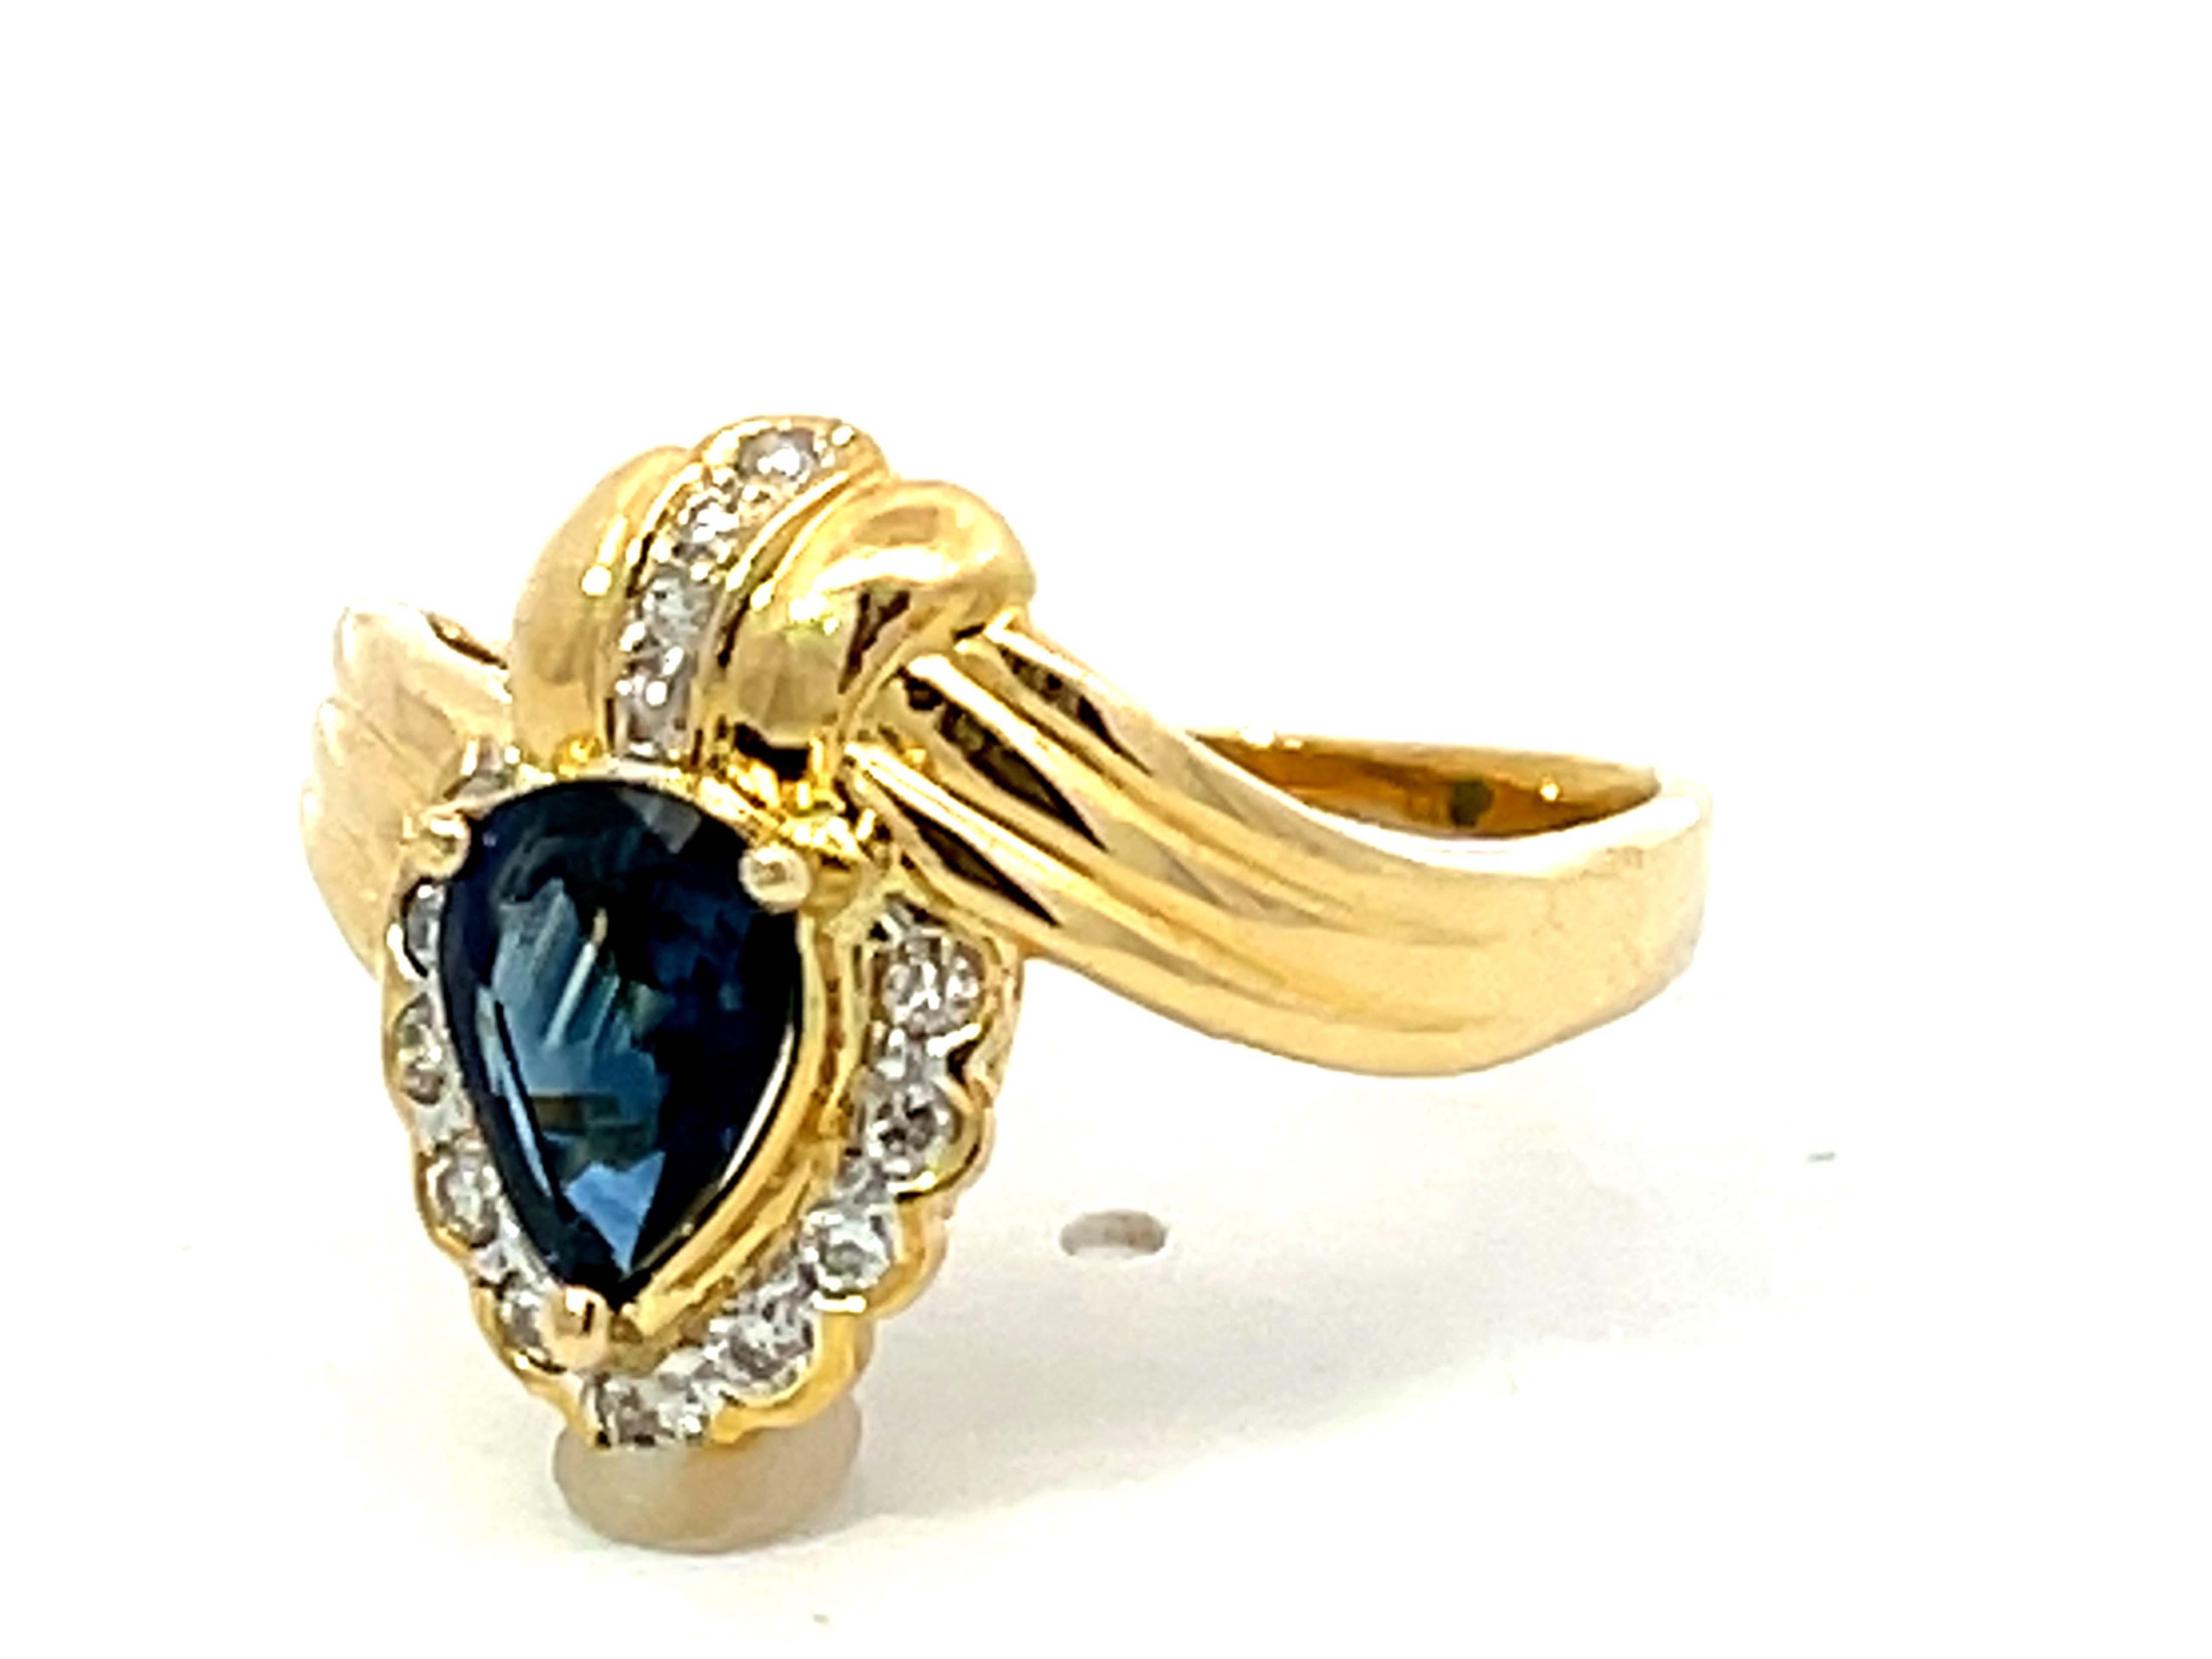 Vintage Pear Shaped Sapphire and Diamond Halo Ring in 18k Yellow Gold In Excellent Condition For Sale In Honolulu, HI